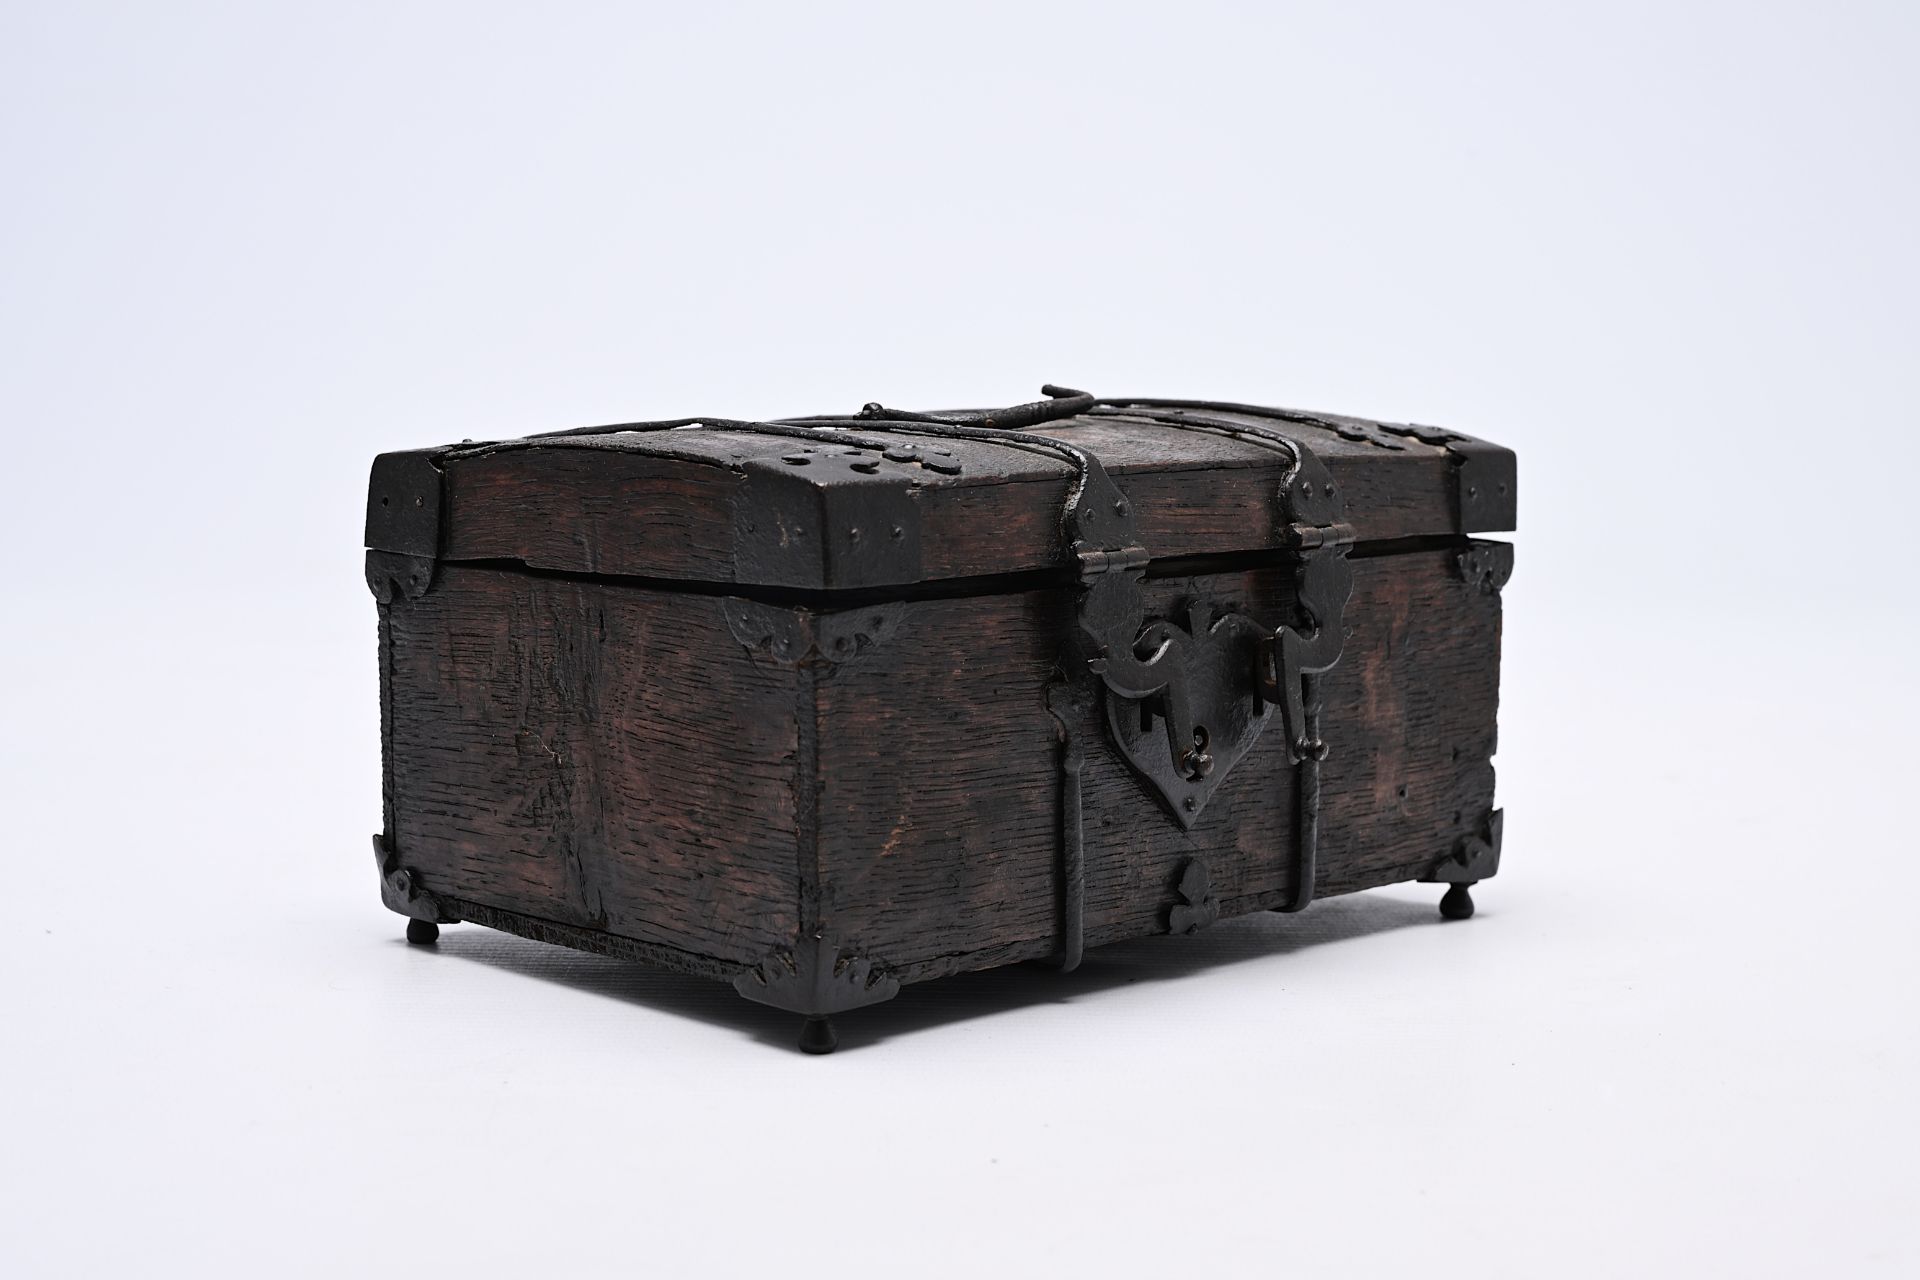 A wooden chest with iron mounts, Western Europe, 16th C. - Image 2 of 11